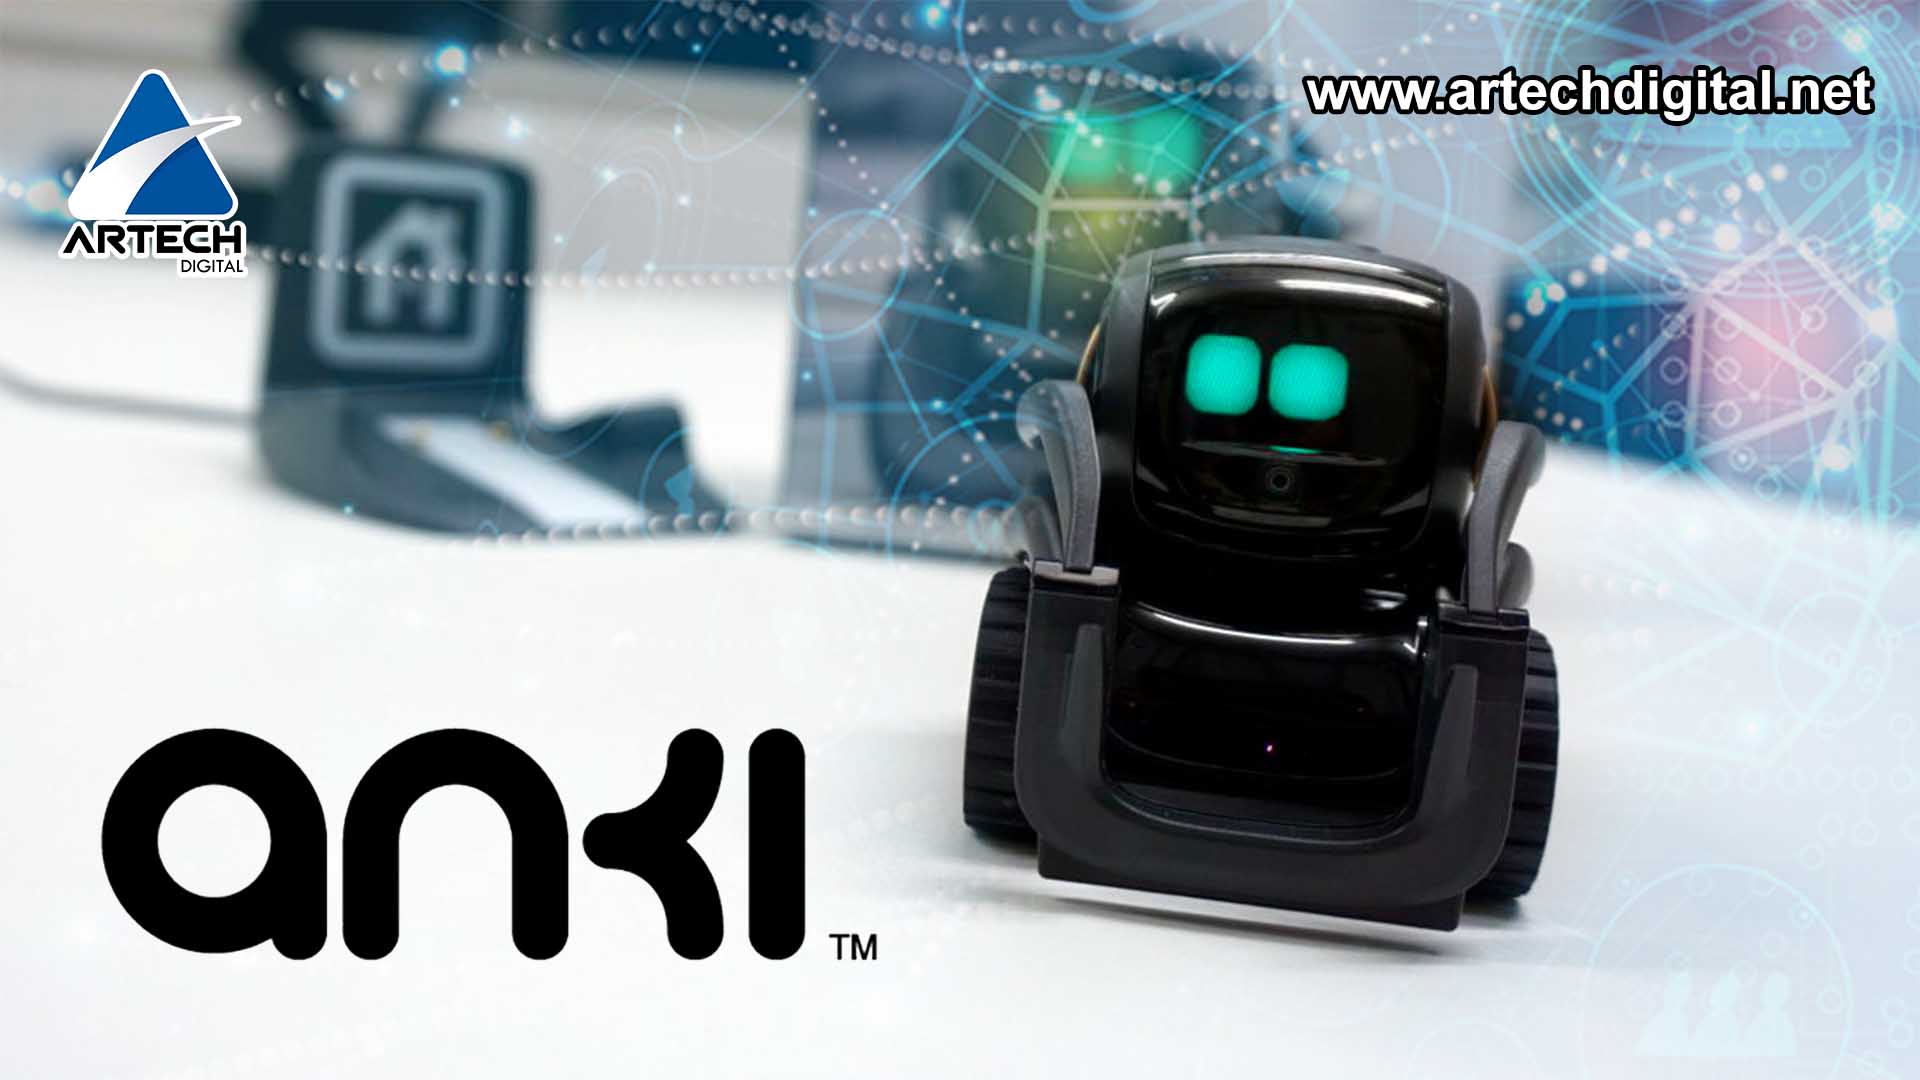 undertrykkeren korn Værdiløs Anki Vector the mini robot that talks, takes pictures and recharges itself.